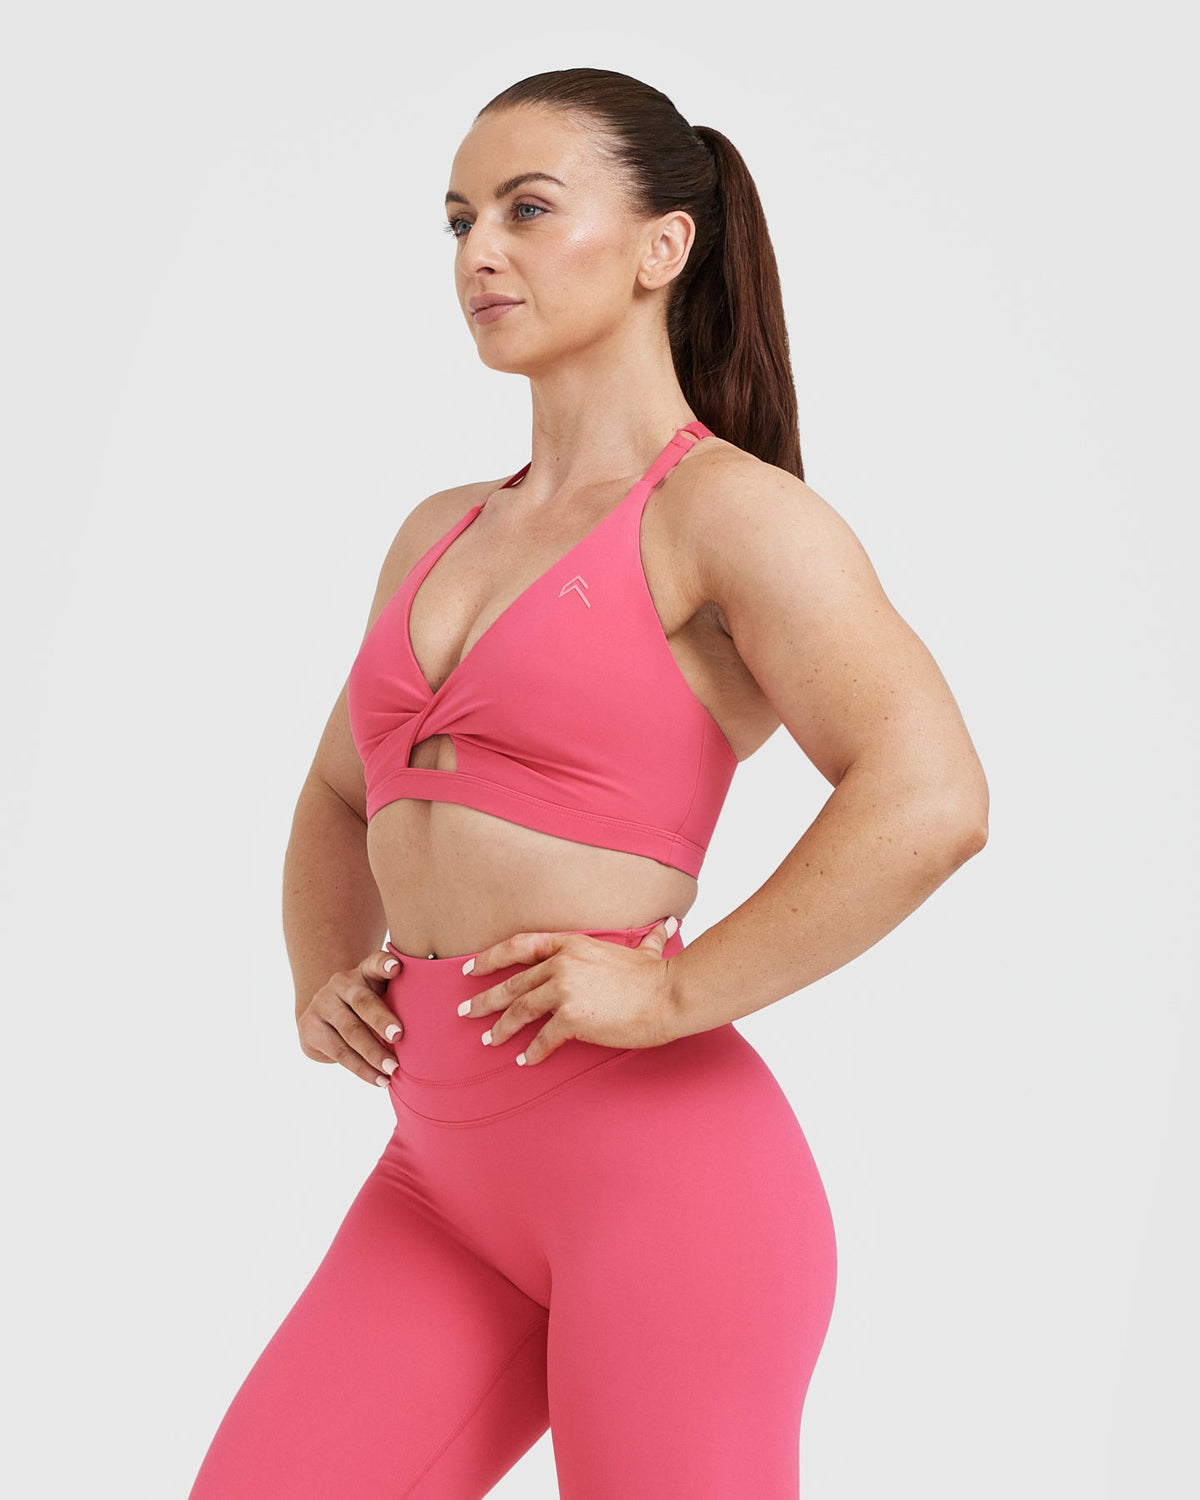 Best Sellers  Product Type: Pants, Sports Bras, Underwear; Price: $20.00 -  $39.99; Support: Maximum